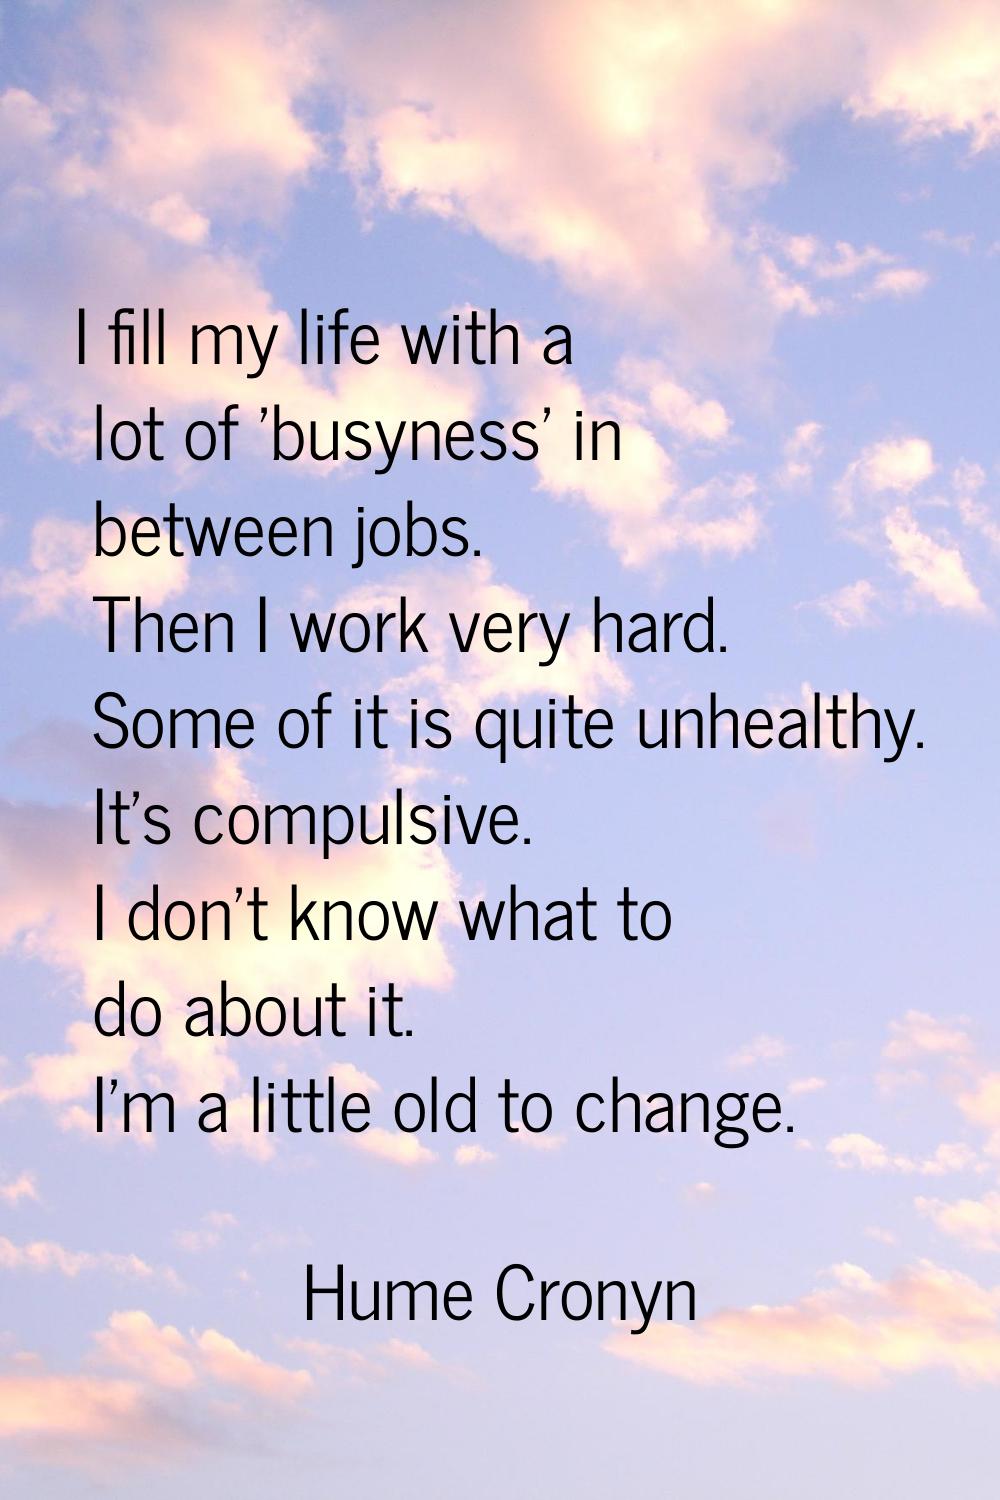 I fill my life with a lot of 'busyness' in between jobs. Then I work very hard. Some of it is quite